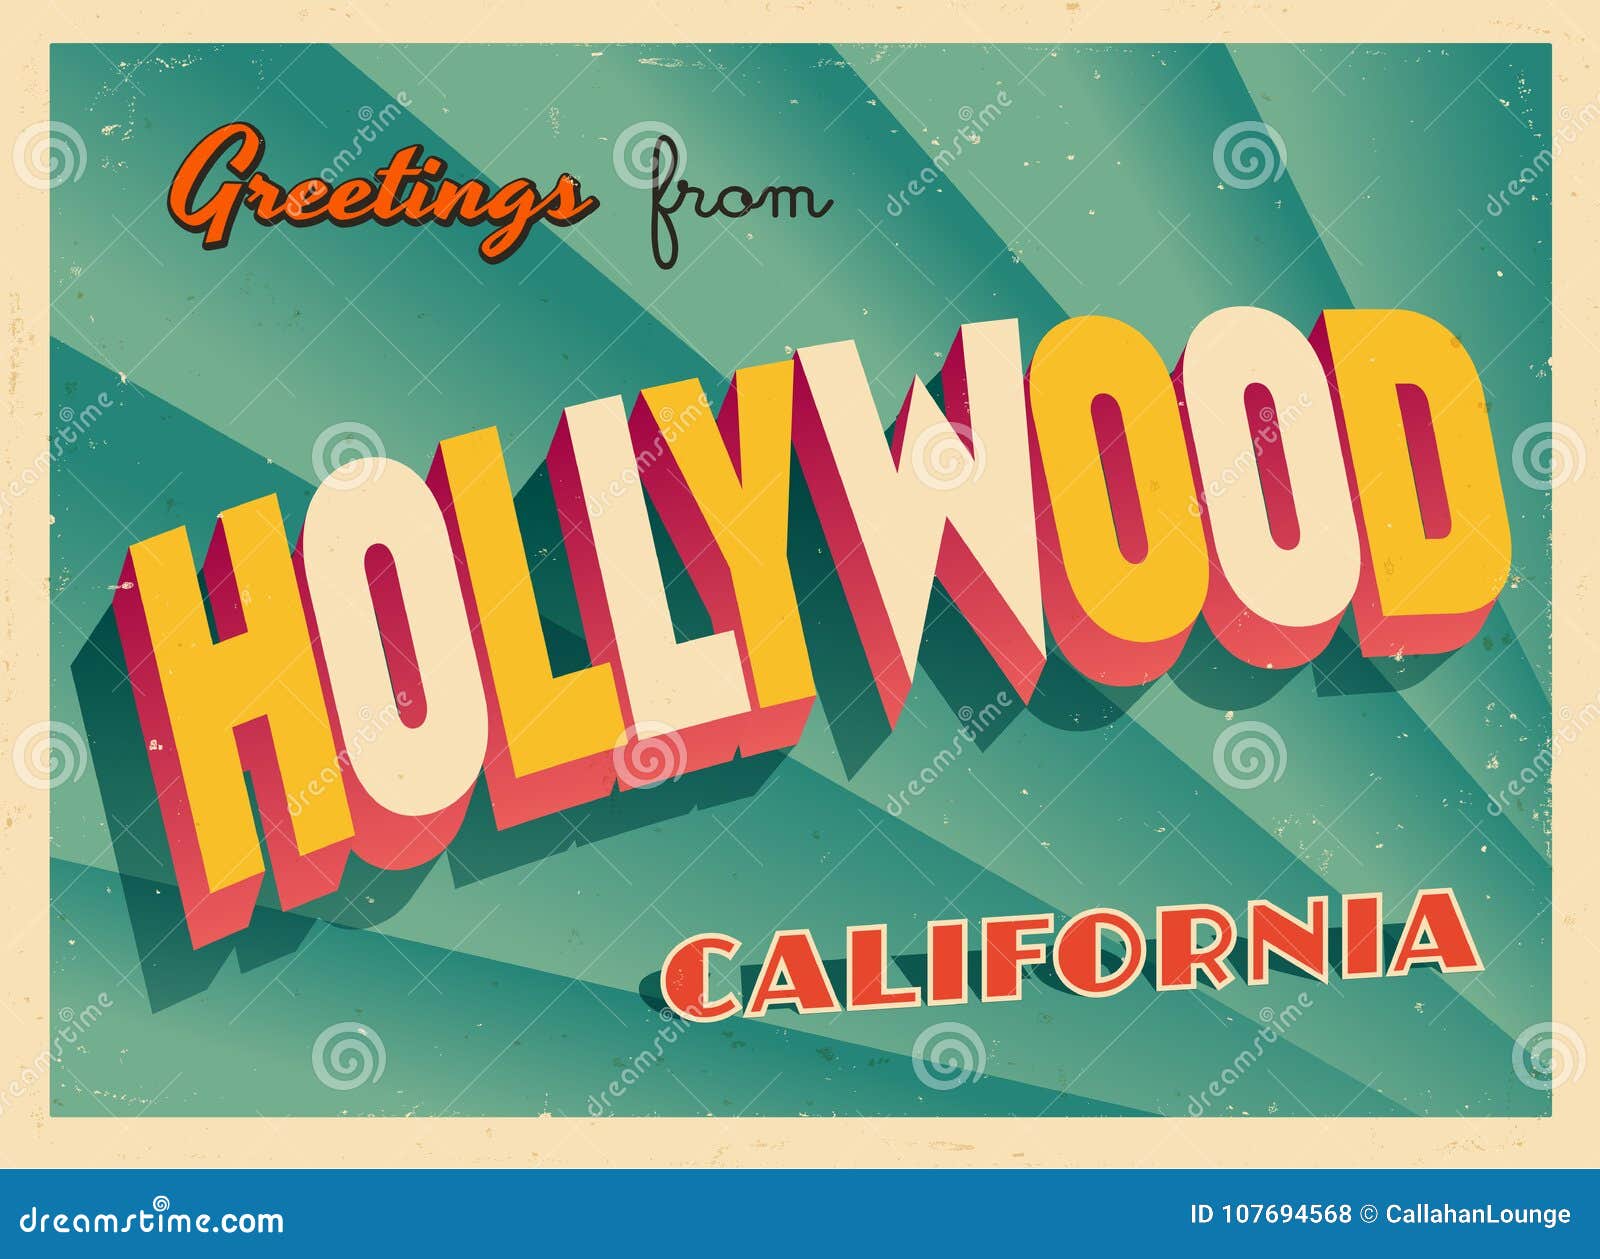 vintage touristic greeting card from hollywood, california.